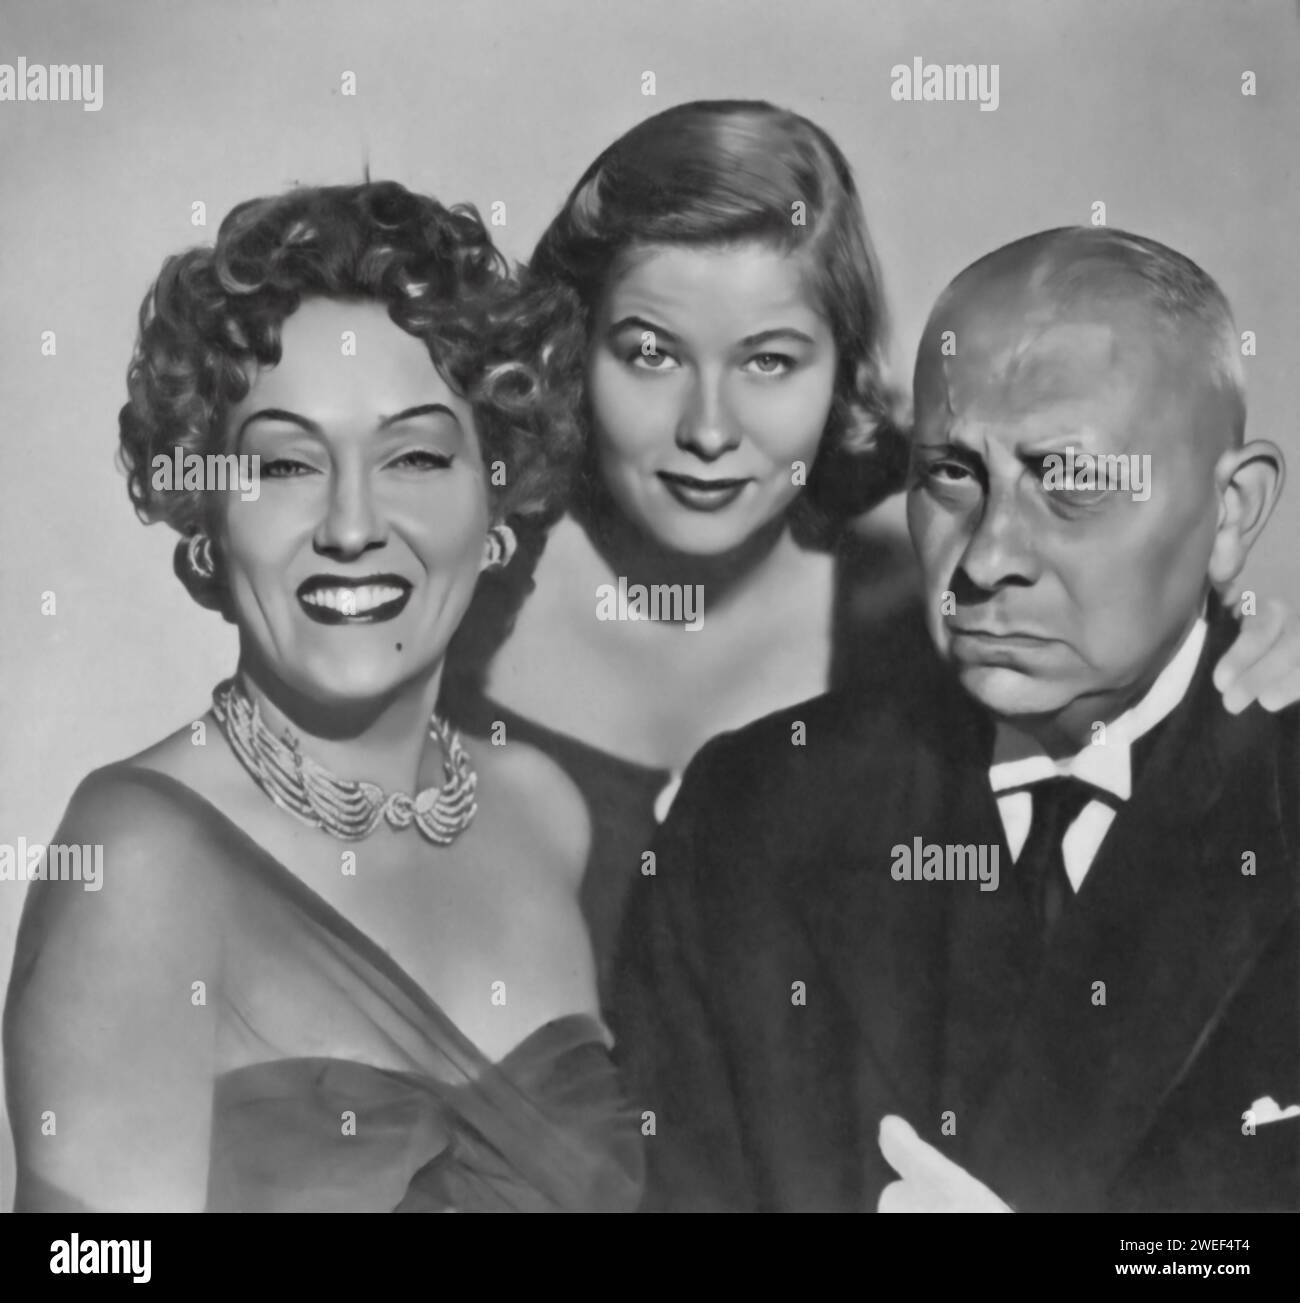 Gloria Swanson, Erich von Stroheim, and Nancy Olson star in 'Sunset Boulevard' (1950), a classic film noir directed by Billy Wilder. Swanson delivers a legendary performance as Norma Desmond, a faded silent film star living in delusion, while von Stroheim portrays Max von Mayerling, her devoted butler and former husband. Olson plays Betty Schaefer, an aspiring screenwriter who becomes involved with Joe Gillis, played by William Holden. Stock Photo